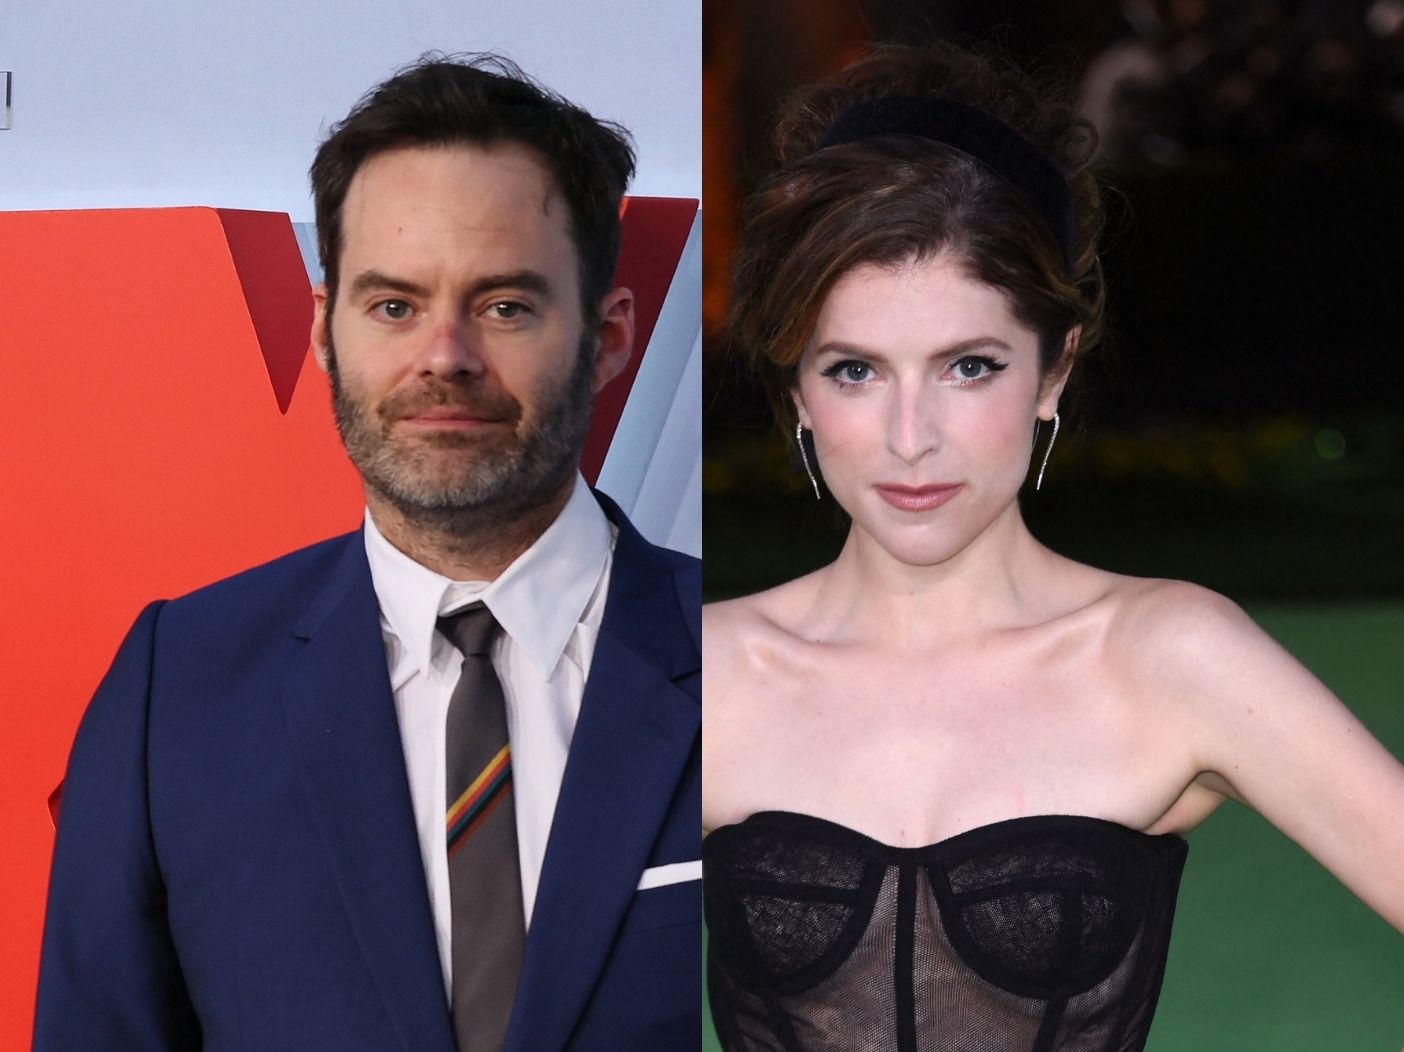 The Rumored Reason Bill Hader & Anna Kendrick Were able to reunite after nearly 2 years